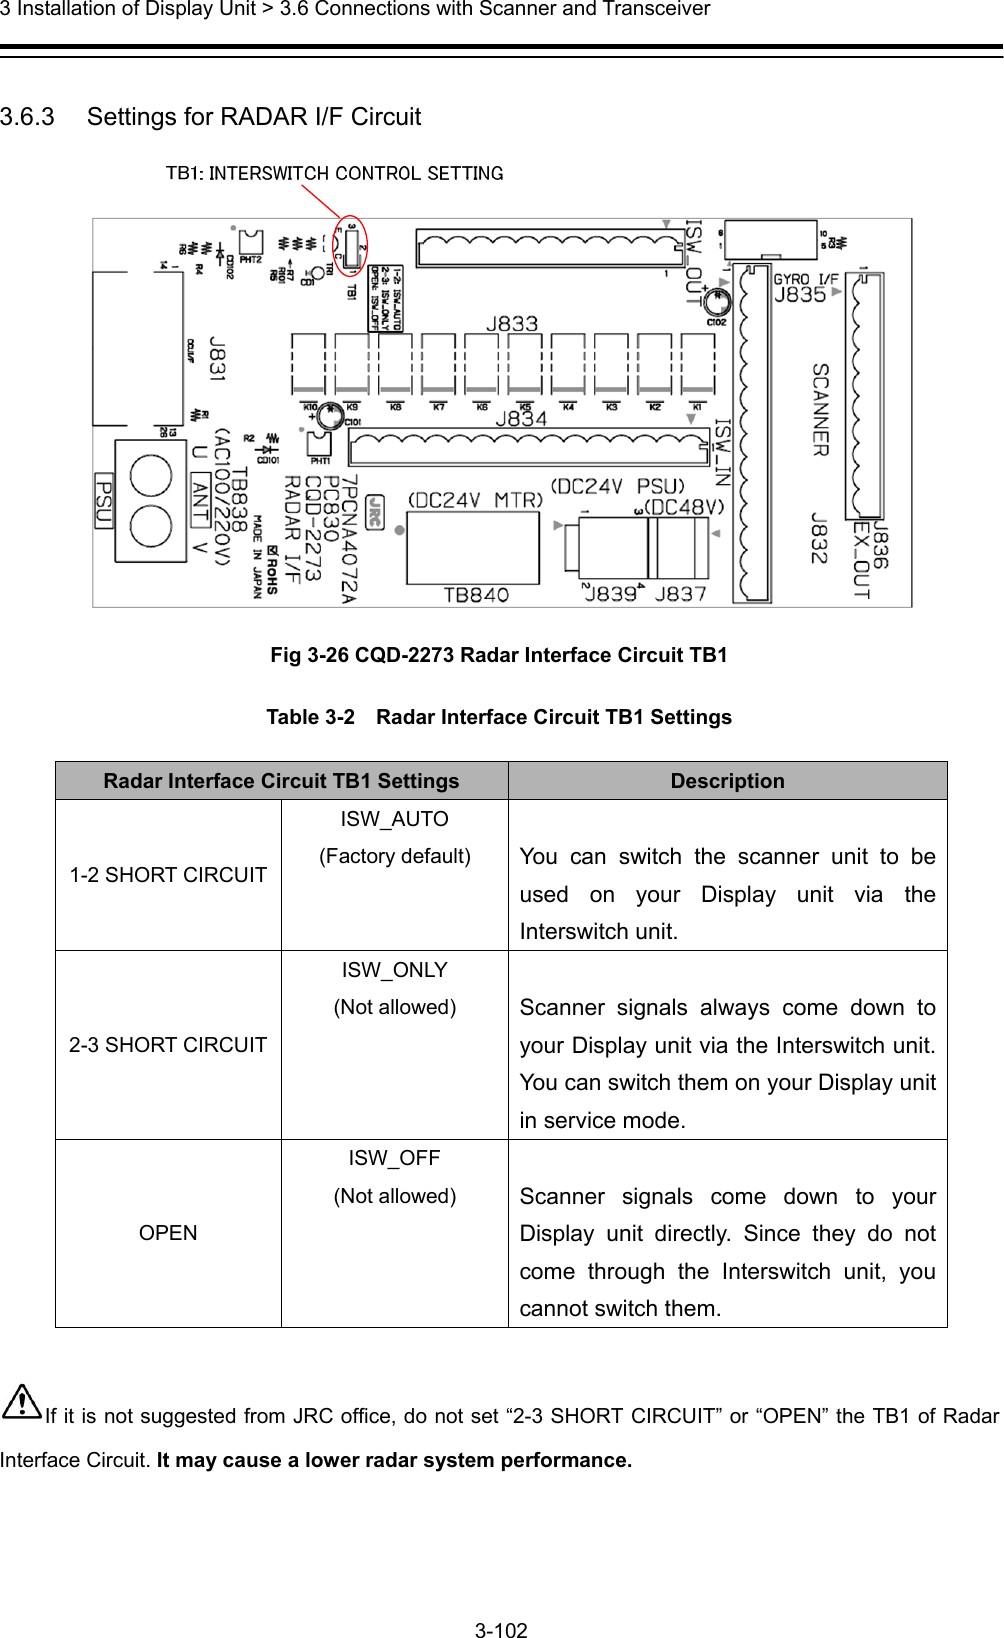  3 Installation of Display Unit &gt; 3.6 Connections with Scanner and Transceiver 3-102   3.6.3   Settings for RADAR I/F Circuit  Fig 3-26 CQD-2273 Radar Interface Circuit TB1 Table 3-2    Radar Interface Circuit TB1 Settings Radar Interface Circuit TB1 Settings  Description 1-2 SHORT CIRCUIT ISW_AUTO (Factory default)  You can switch the scanner unit to be used on your Display unit via the Interswitch unit. 2-3 SHORT CIRCUIT ISW_ONLY (Not allowed)  Scanner signals always come down to your Display unit via the Interswitch unit. You can switch them on your Display unit in service mode. OPEN ISW_OFF (Not allowed)  Scanner signals come down to your Display unit directly. Since they do not come through the Interswitch unit, you cannot switch them.  If it is not suggested from JRC office, do not set “2-3 SHORT CIRCUIT” or “OPEN” the TB1 of Radar Interface Circuit. It may cause a lower radar system performance.  